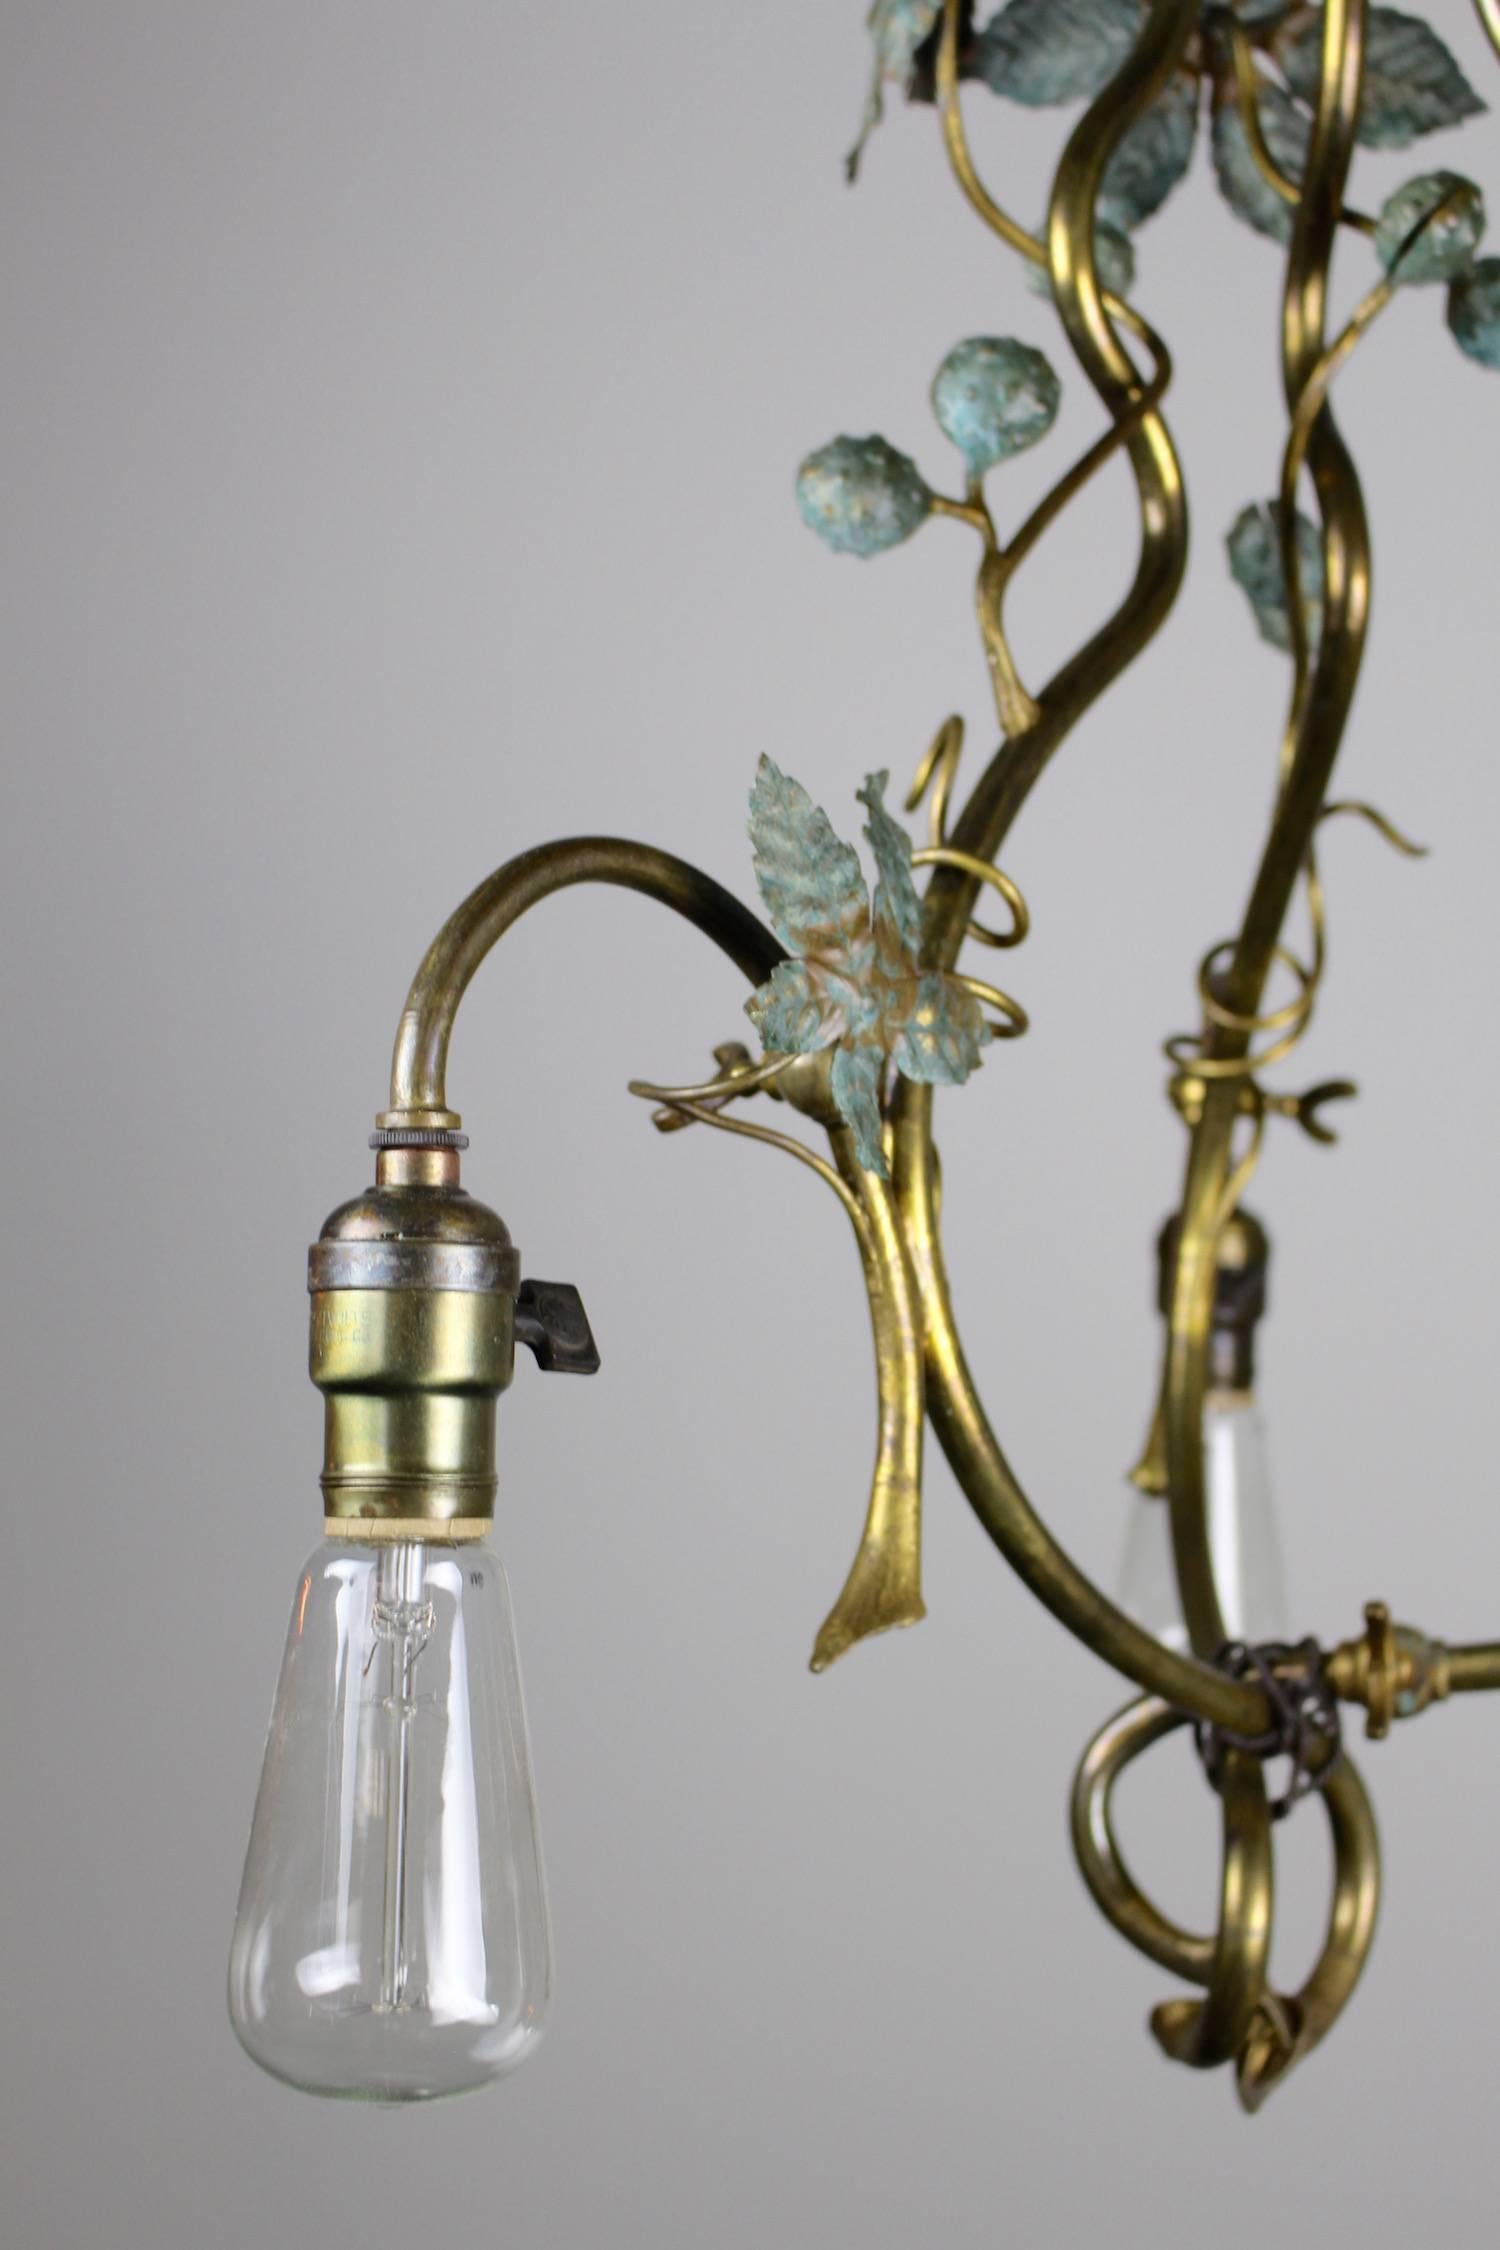 Organic Three-Light Gas Fixture, circa 1910 In Excellent Condition For Sale In Vancouver, BC